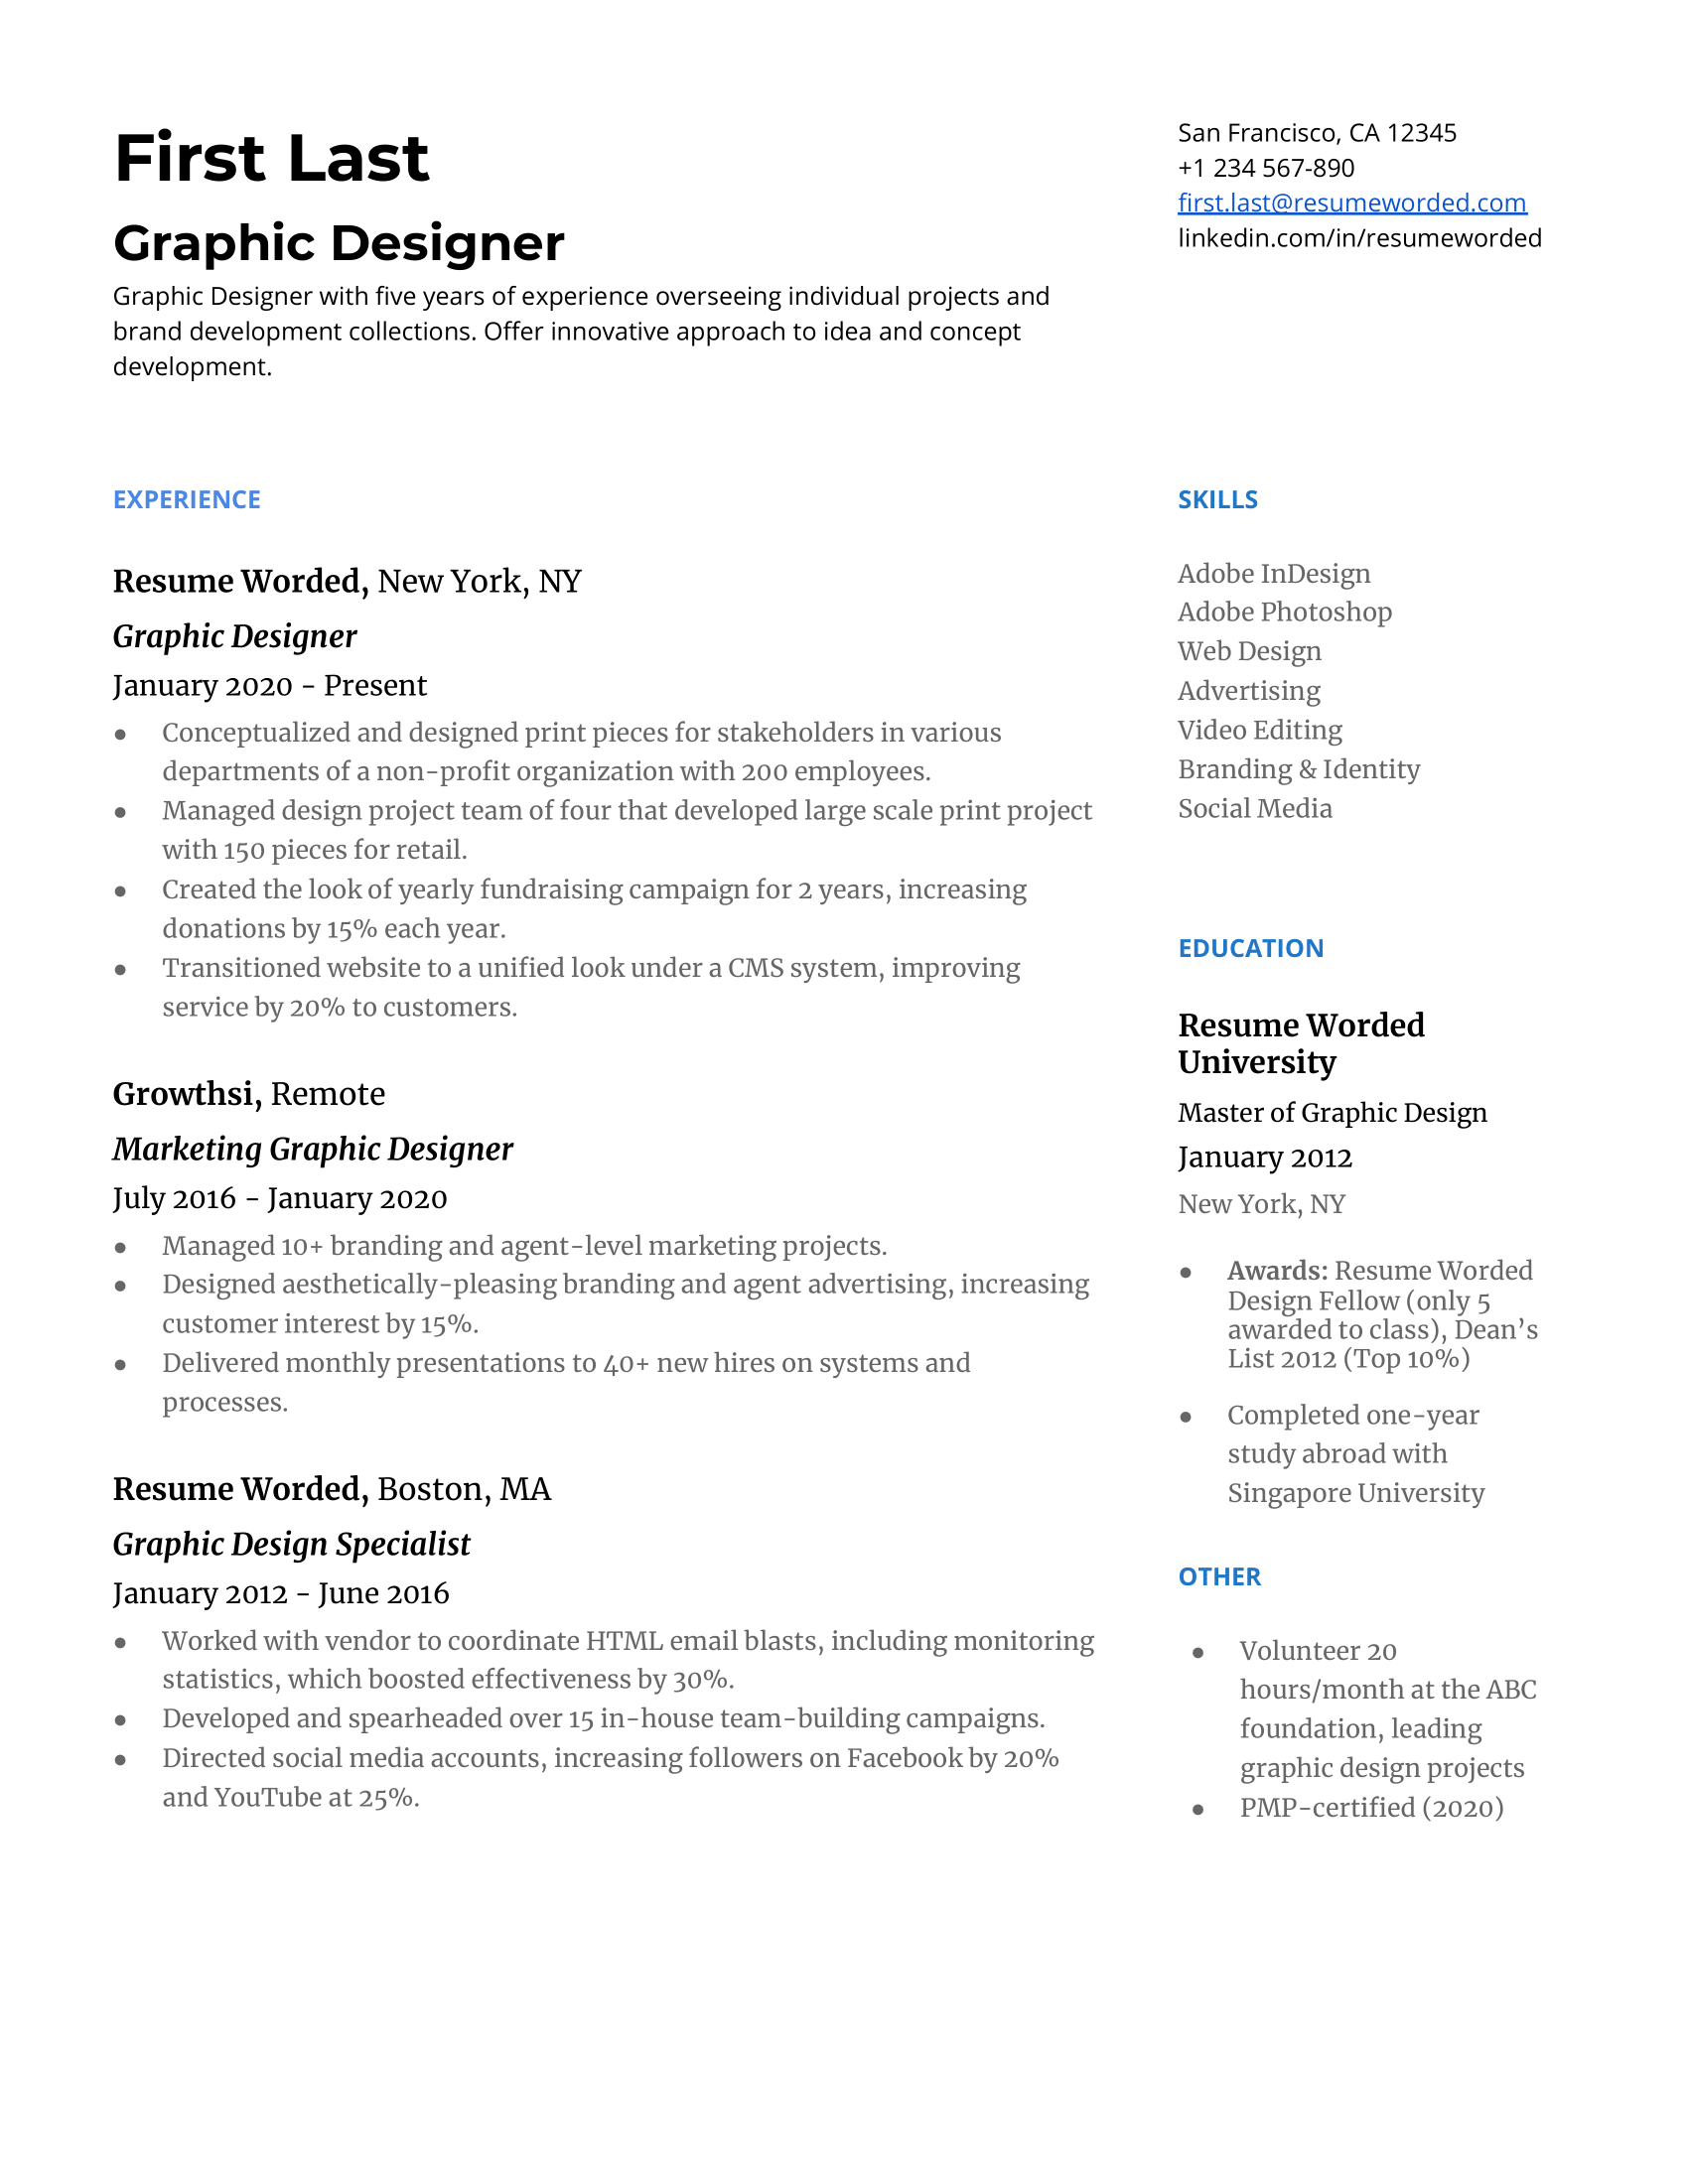 Graphic designer resume template example featuring strong action verbs and hard skills